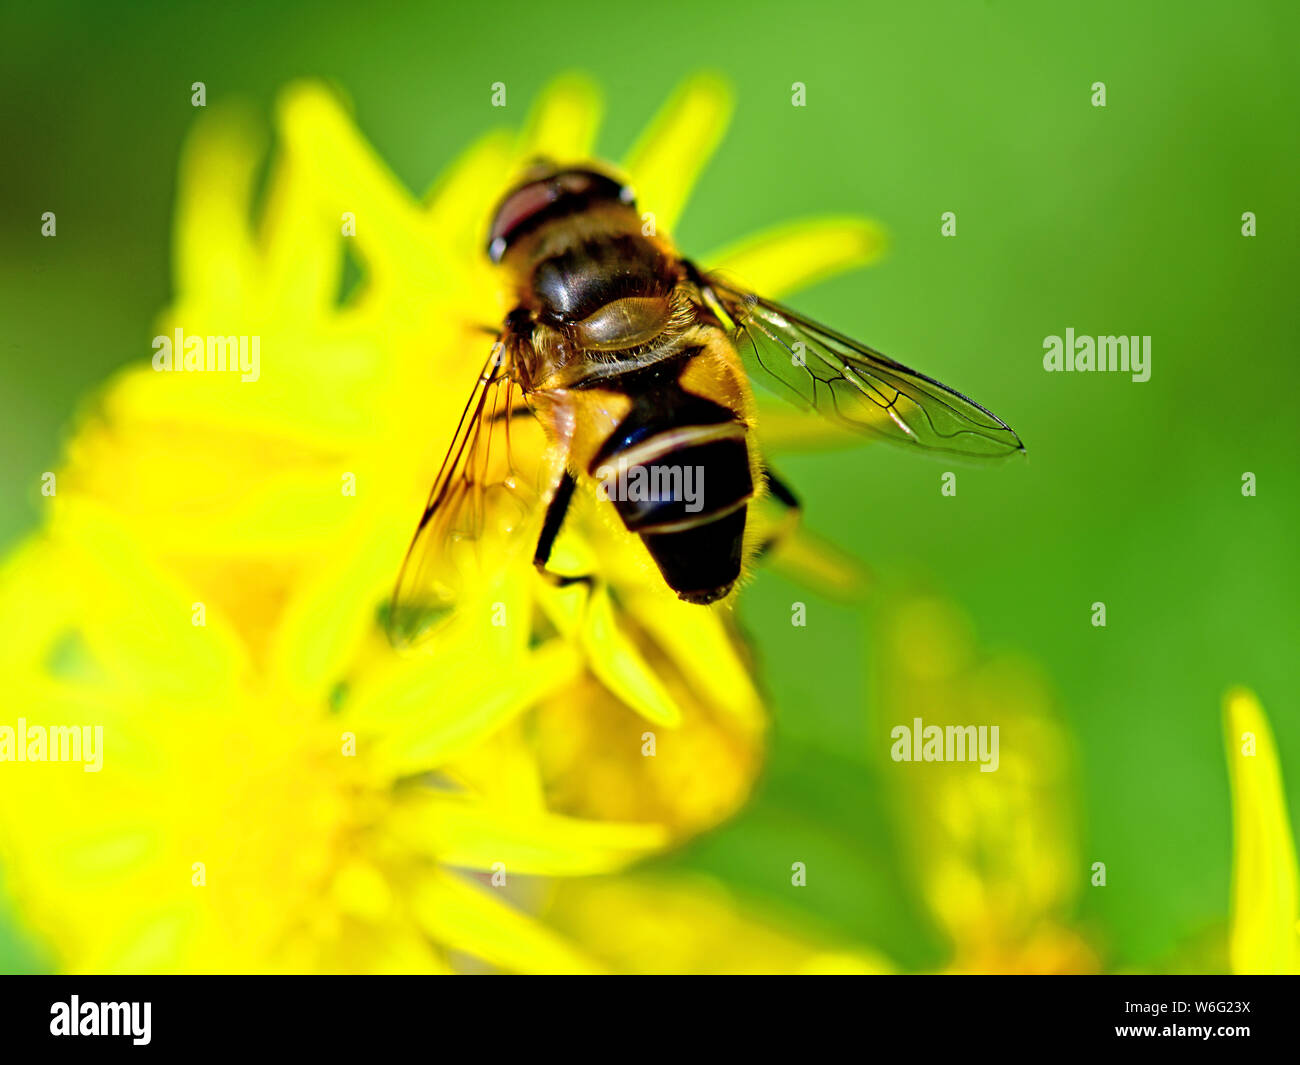 Single lone bee wasp fertilising yellow flower against green muted background Stock Photo